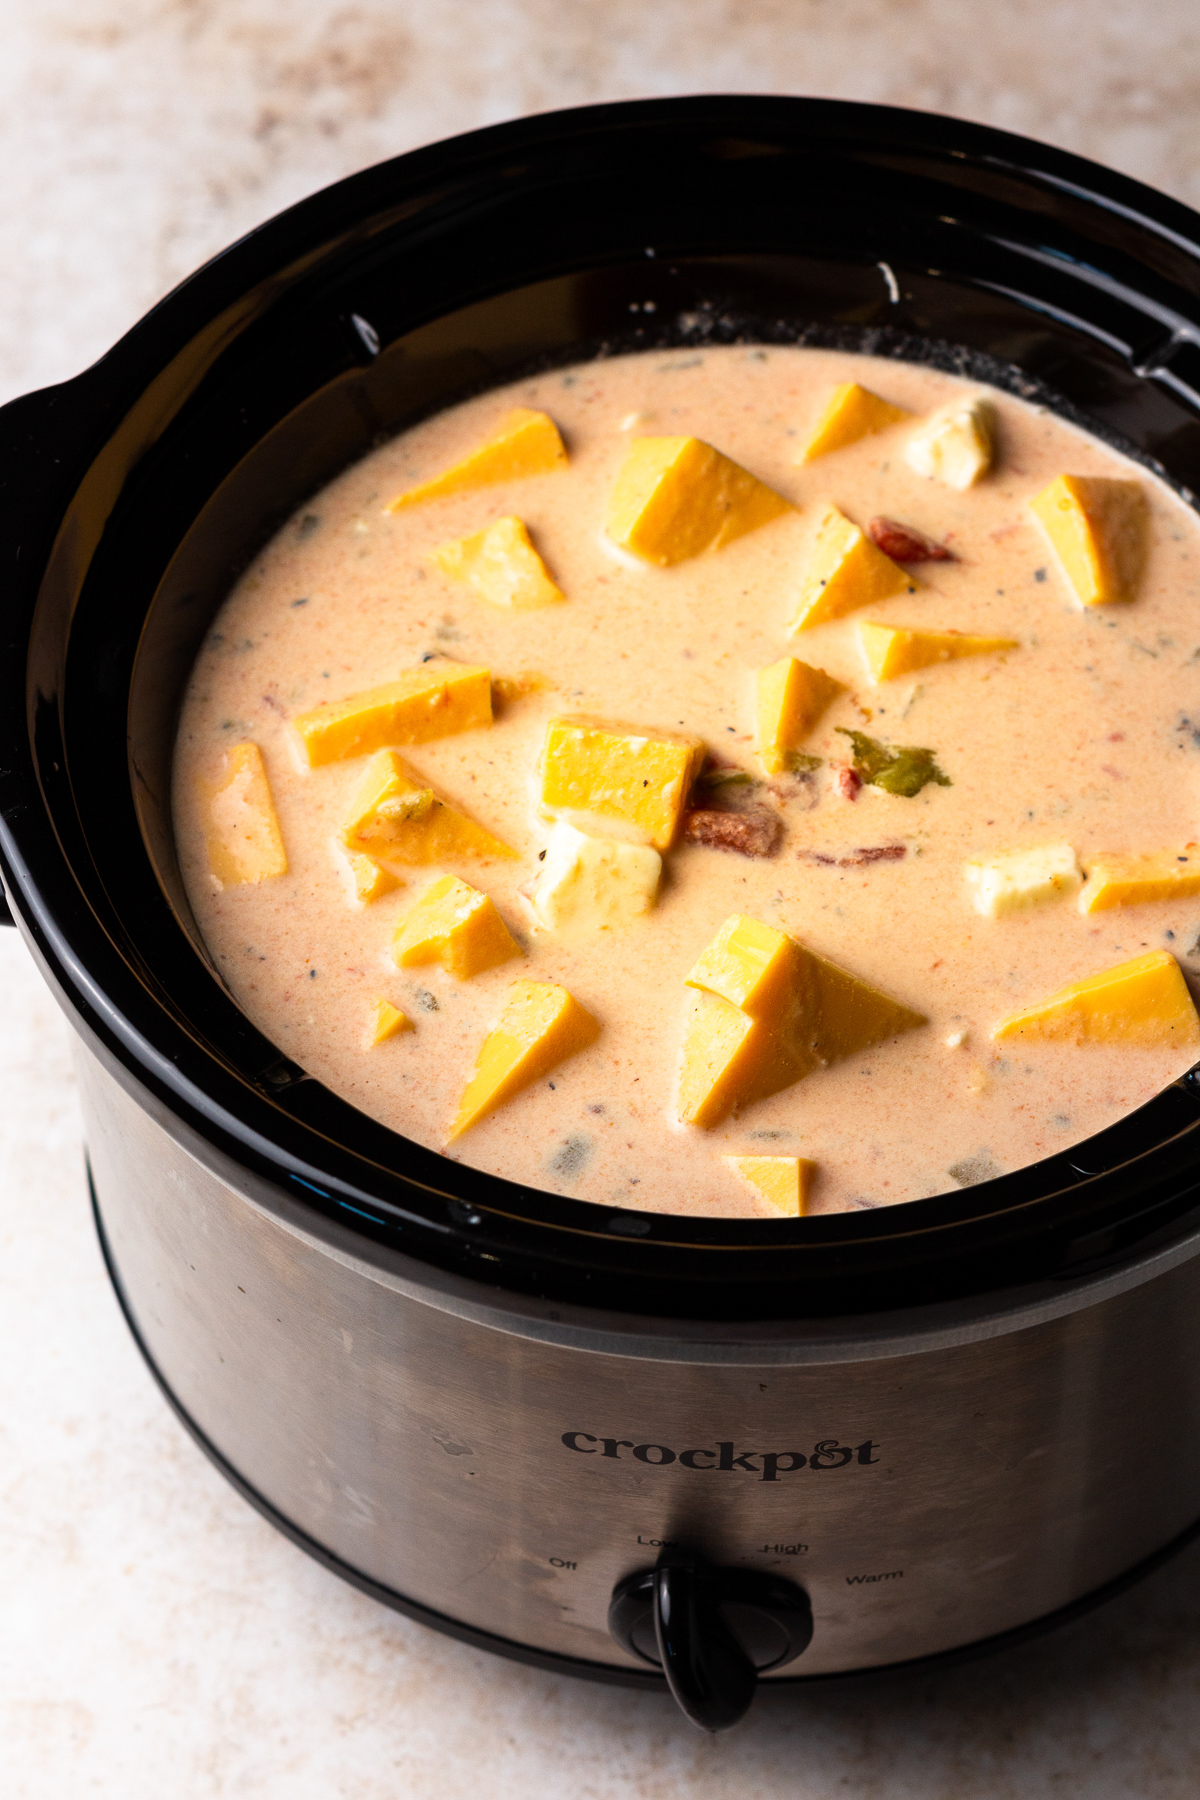 https://www.thecookierookie.com/wp-content/uploads/2019/12/how-to-crockpot-queso-recipe-2.jpg